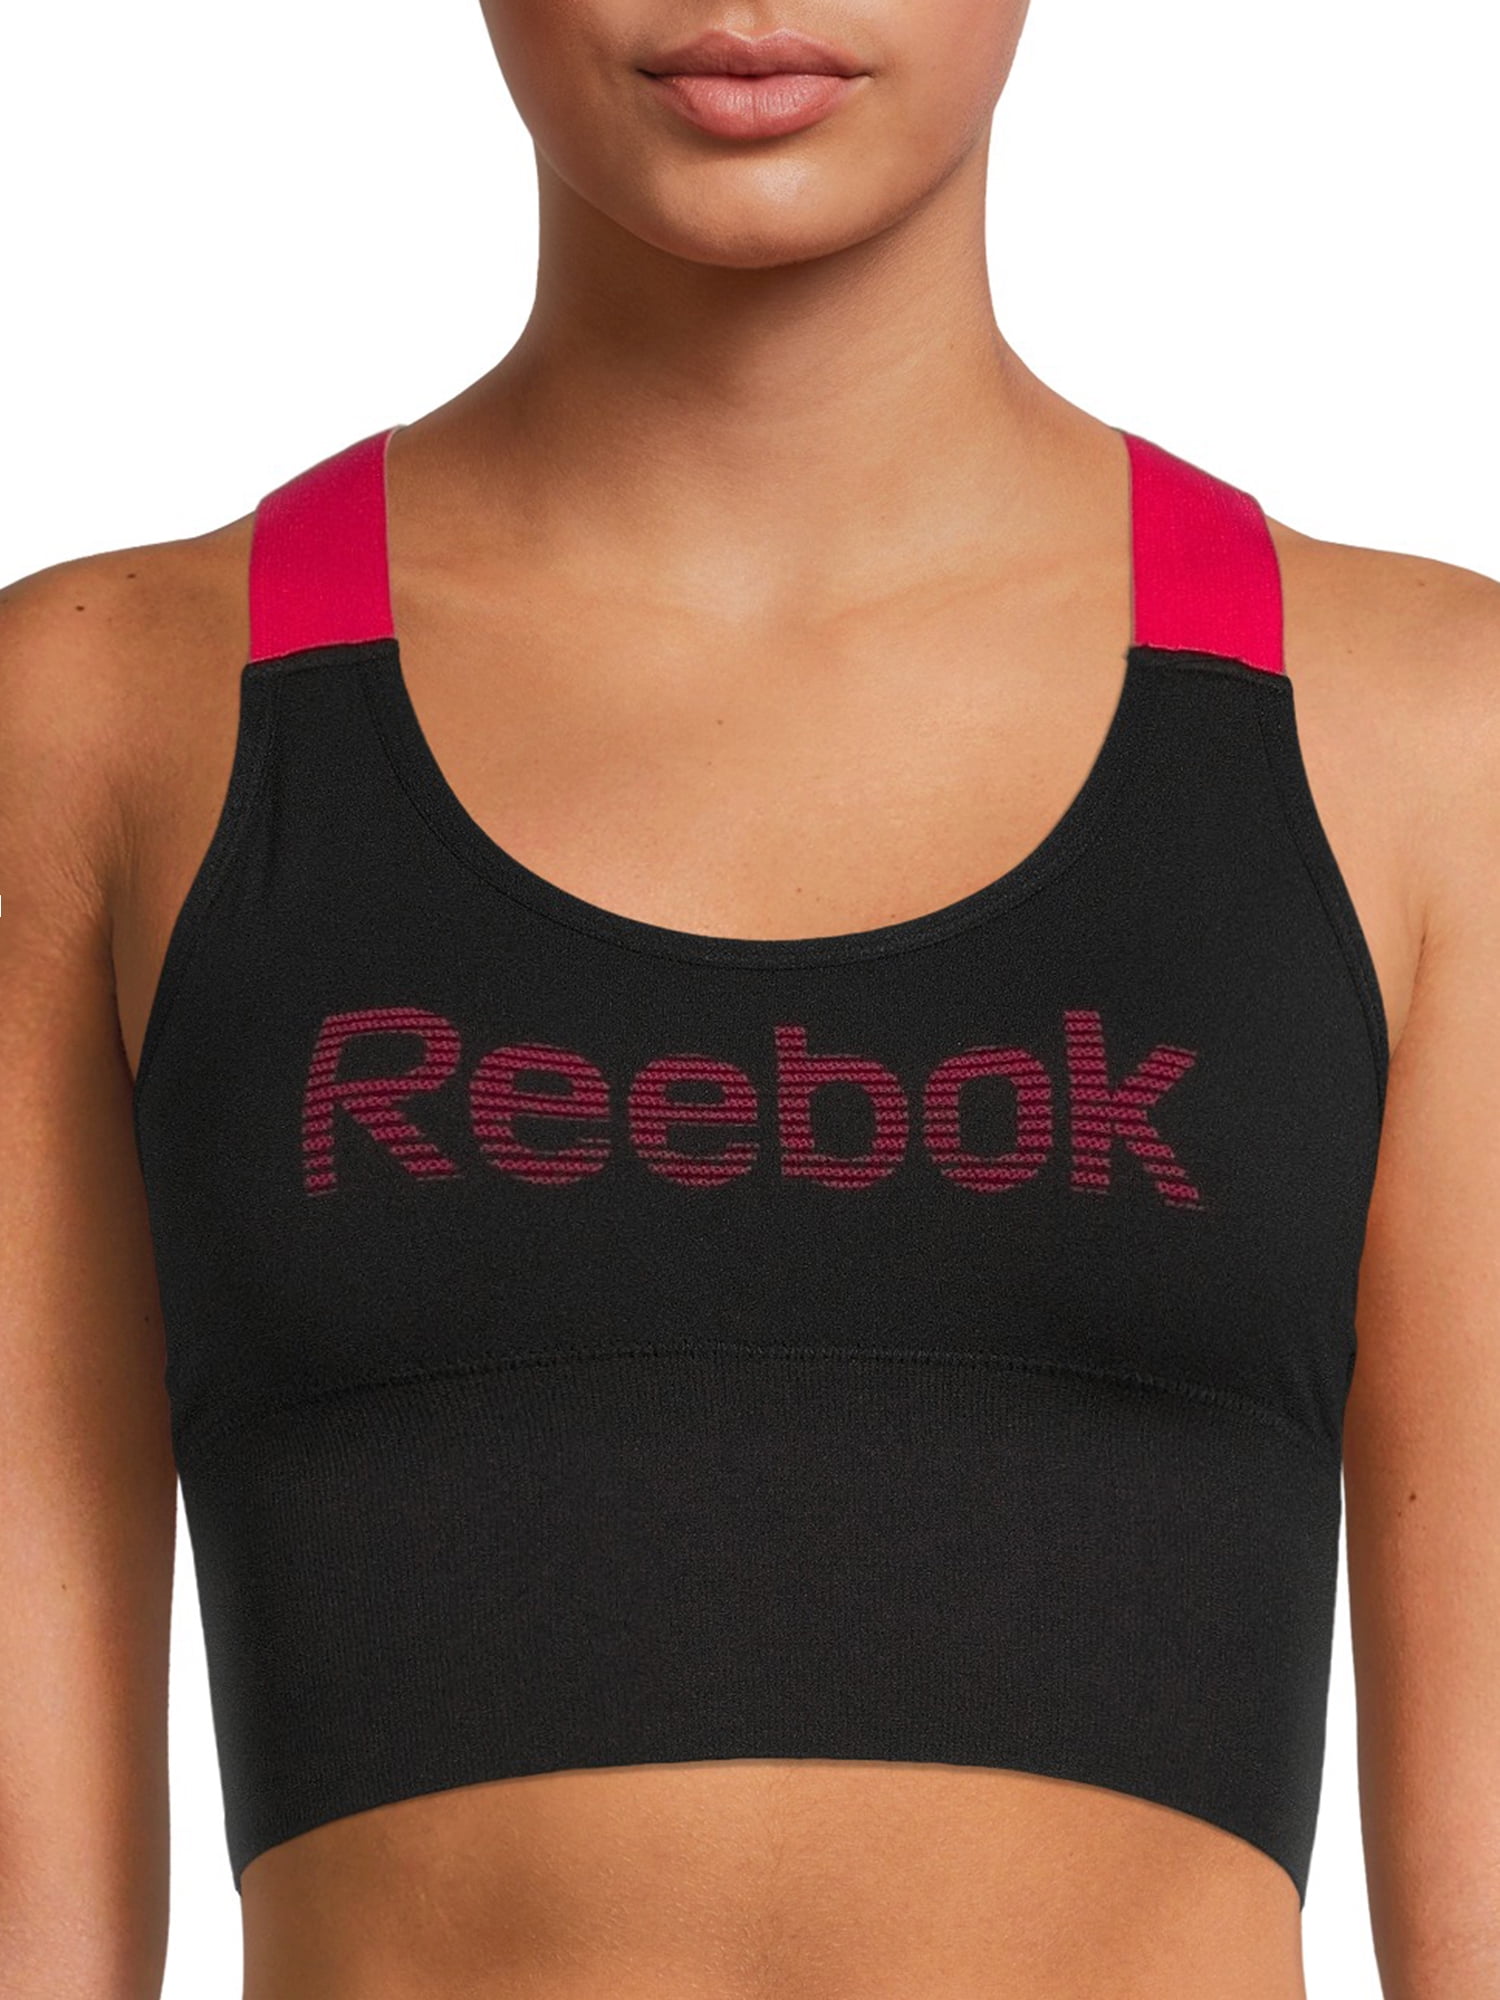 Reebok Girls’ Bralette 4 Pack Racerback Seamless Longline Cami Bralette with Removable Pads 